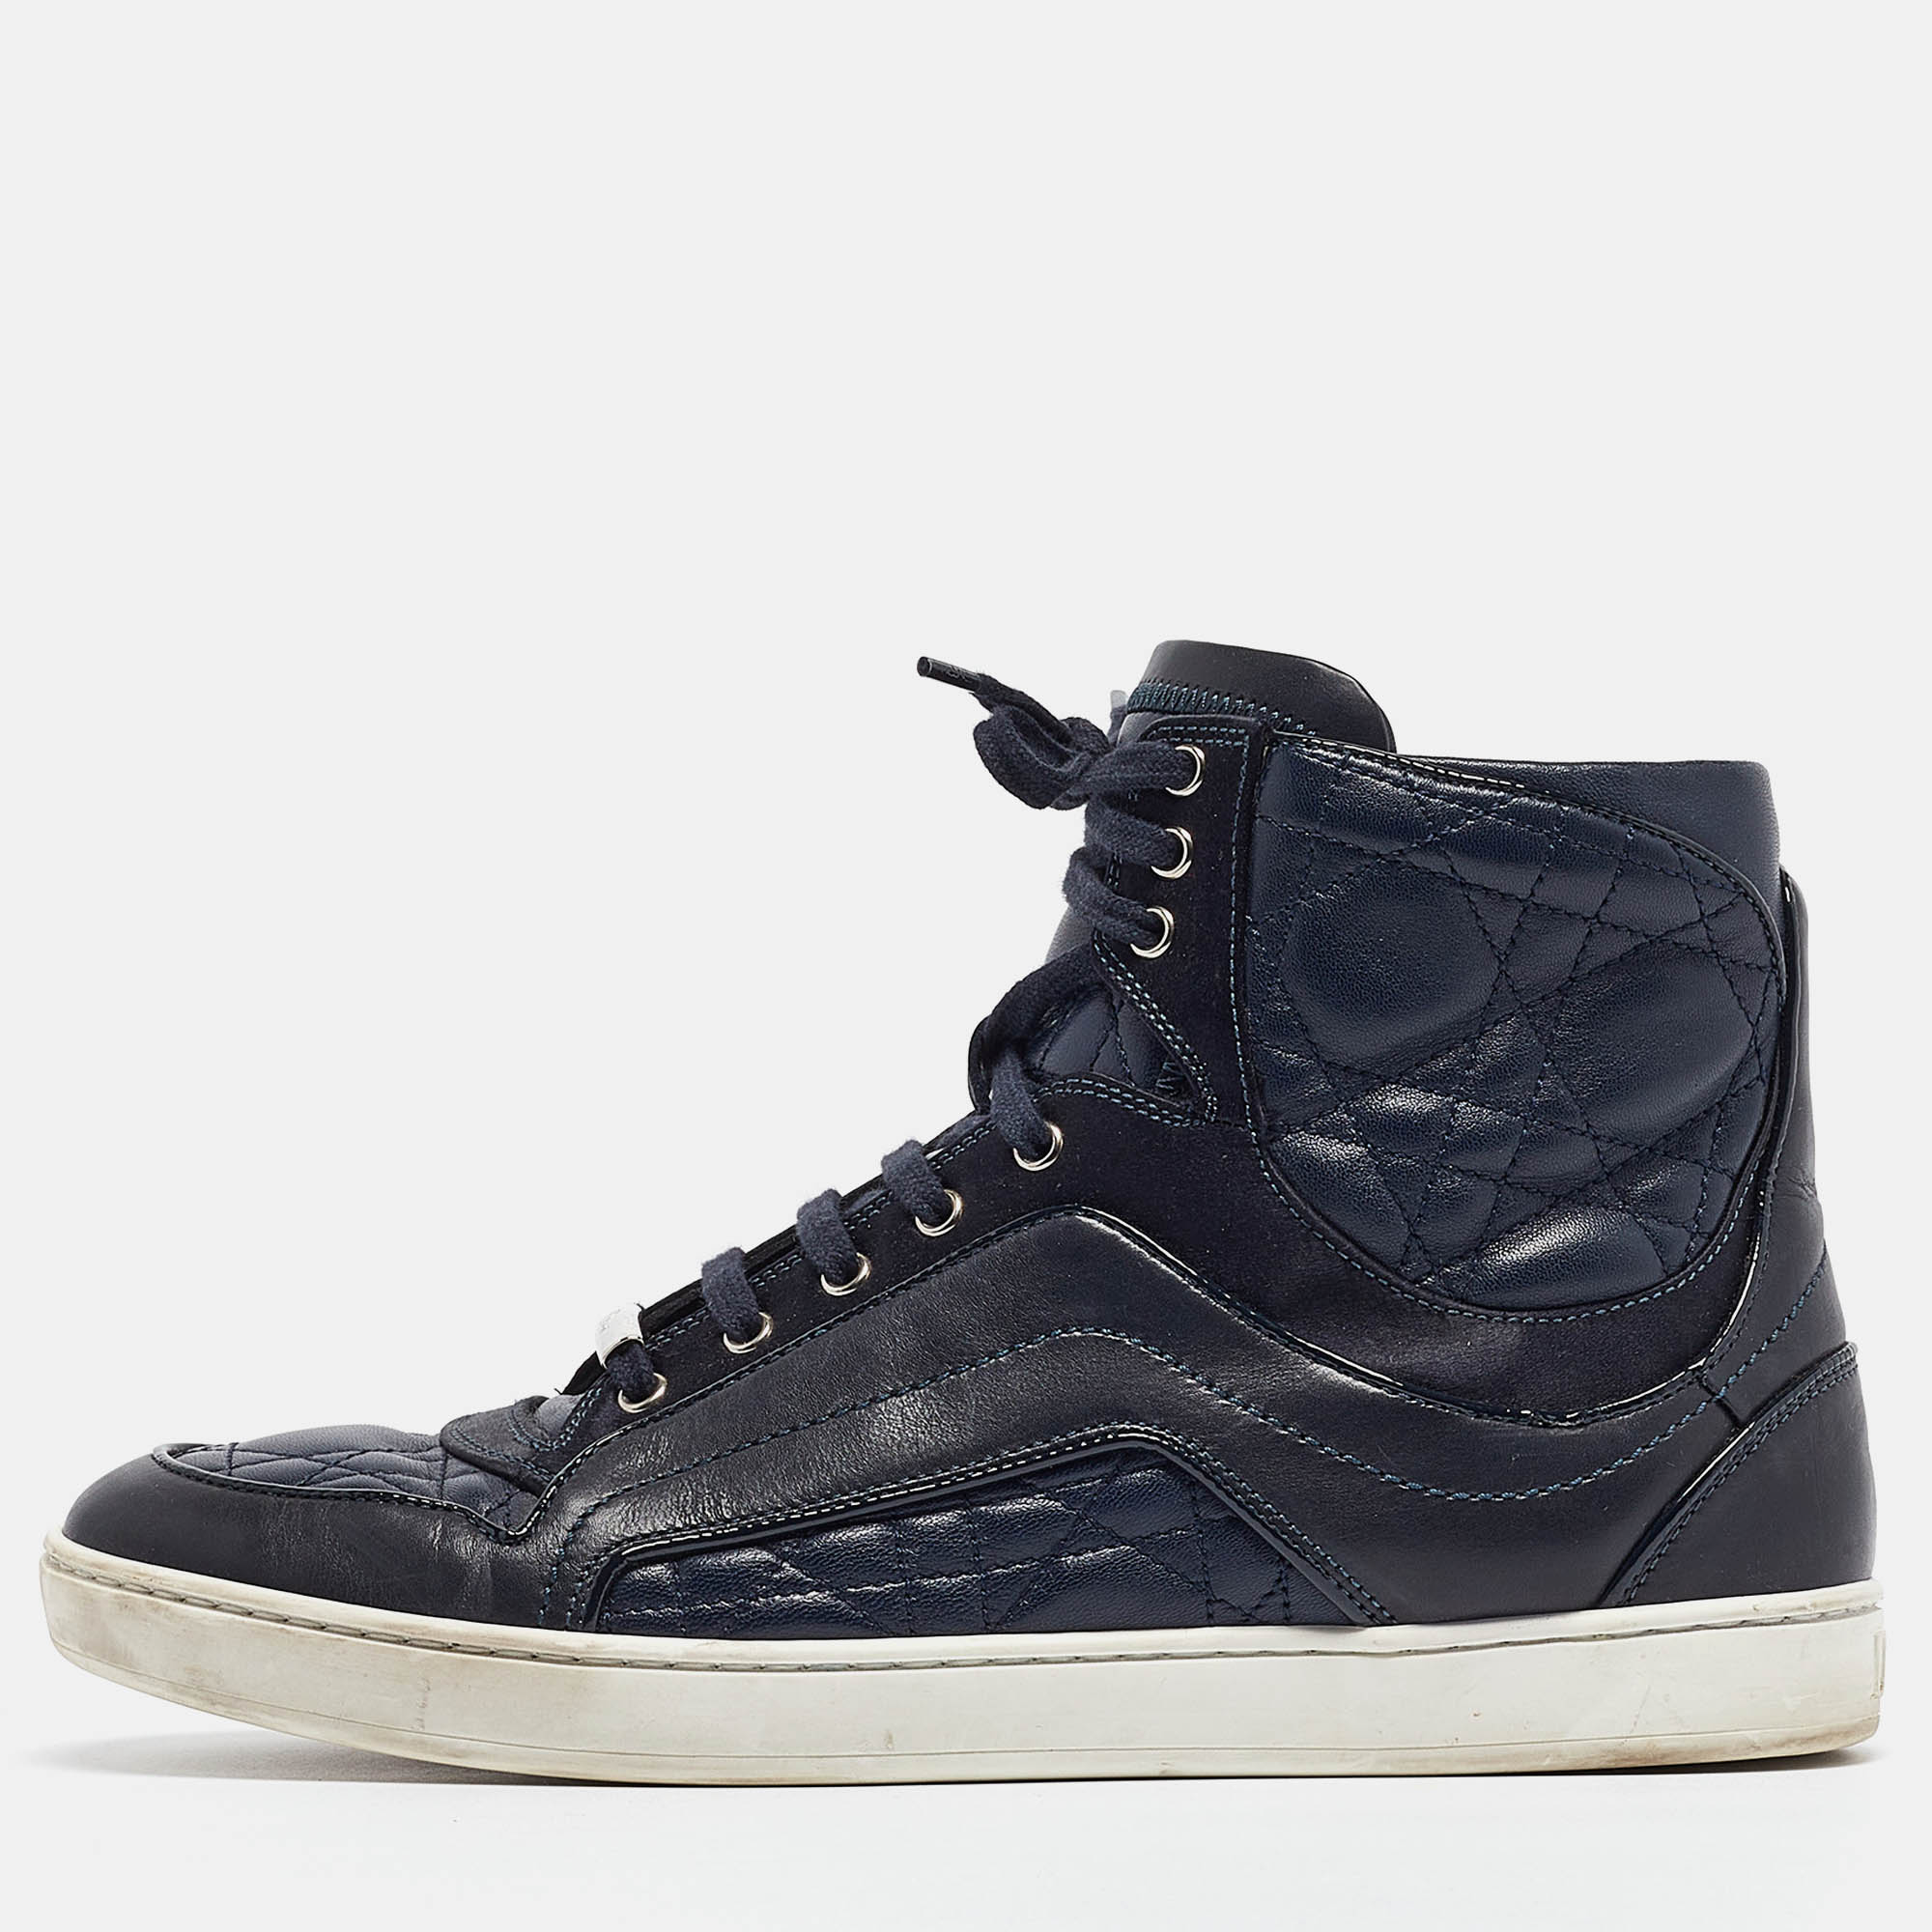 Dior blue cannage leather high top sneakers size 37